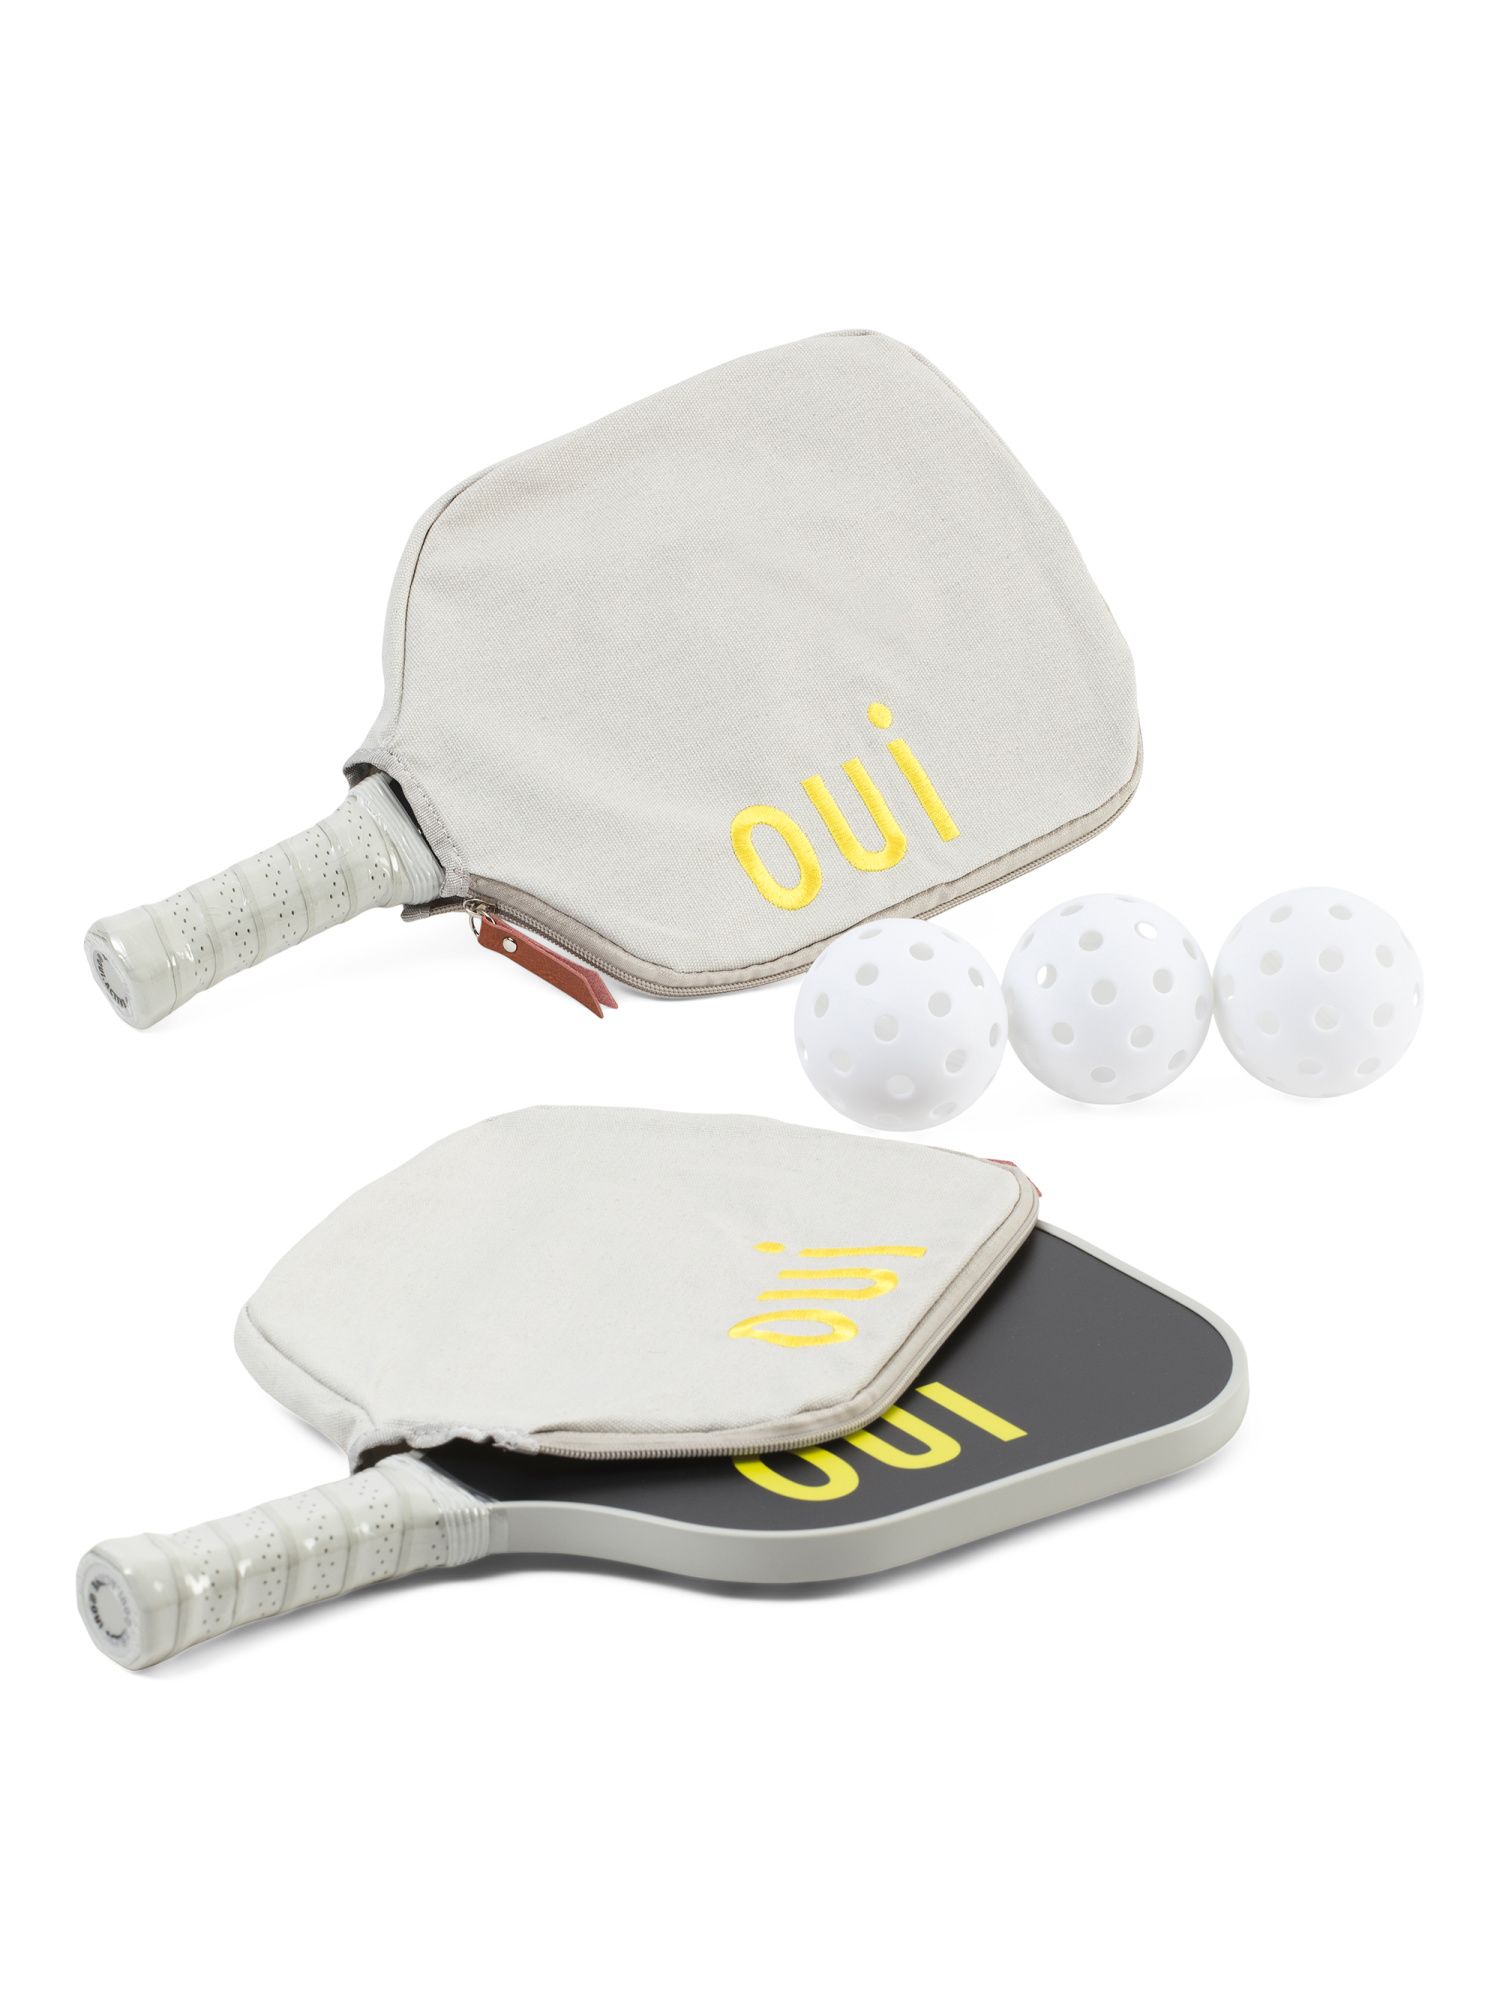 7pc Pickle Ball Paddle And Case Set | TJ Maxx